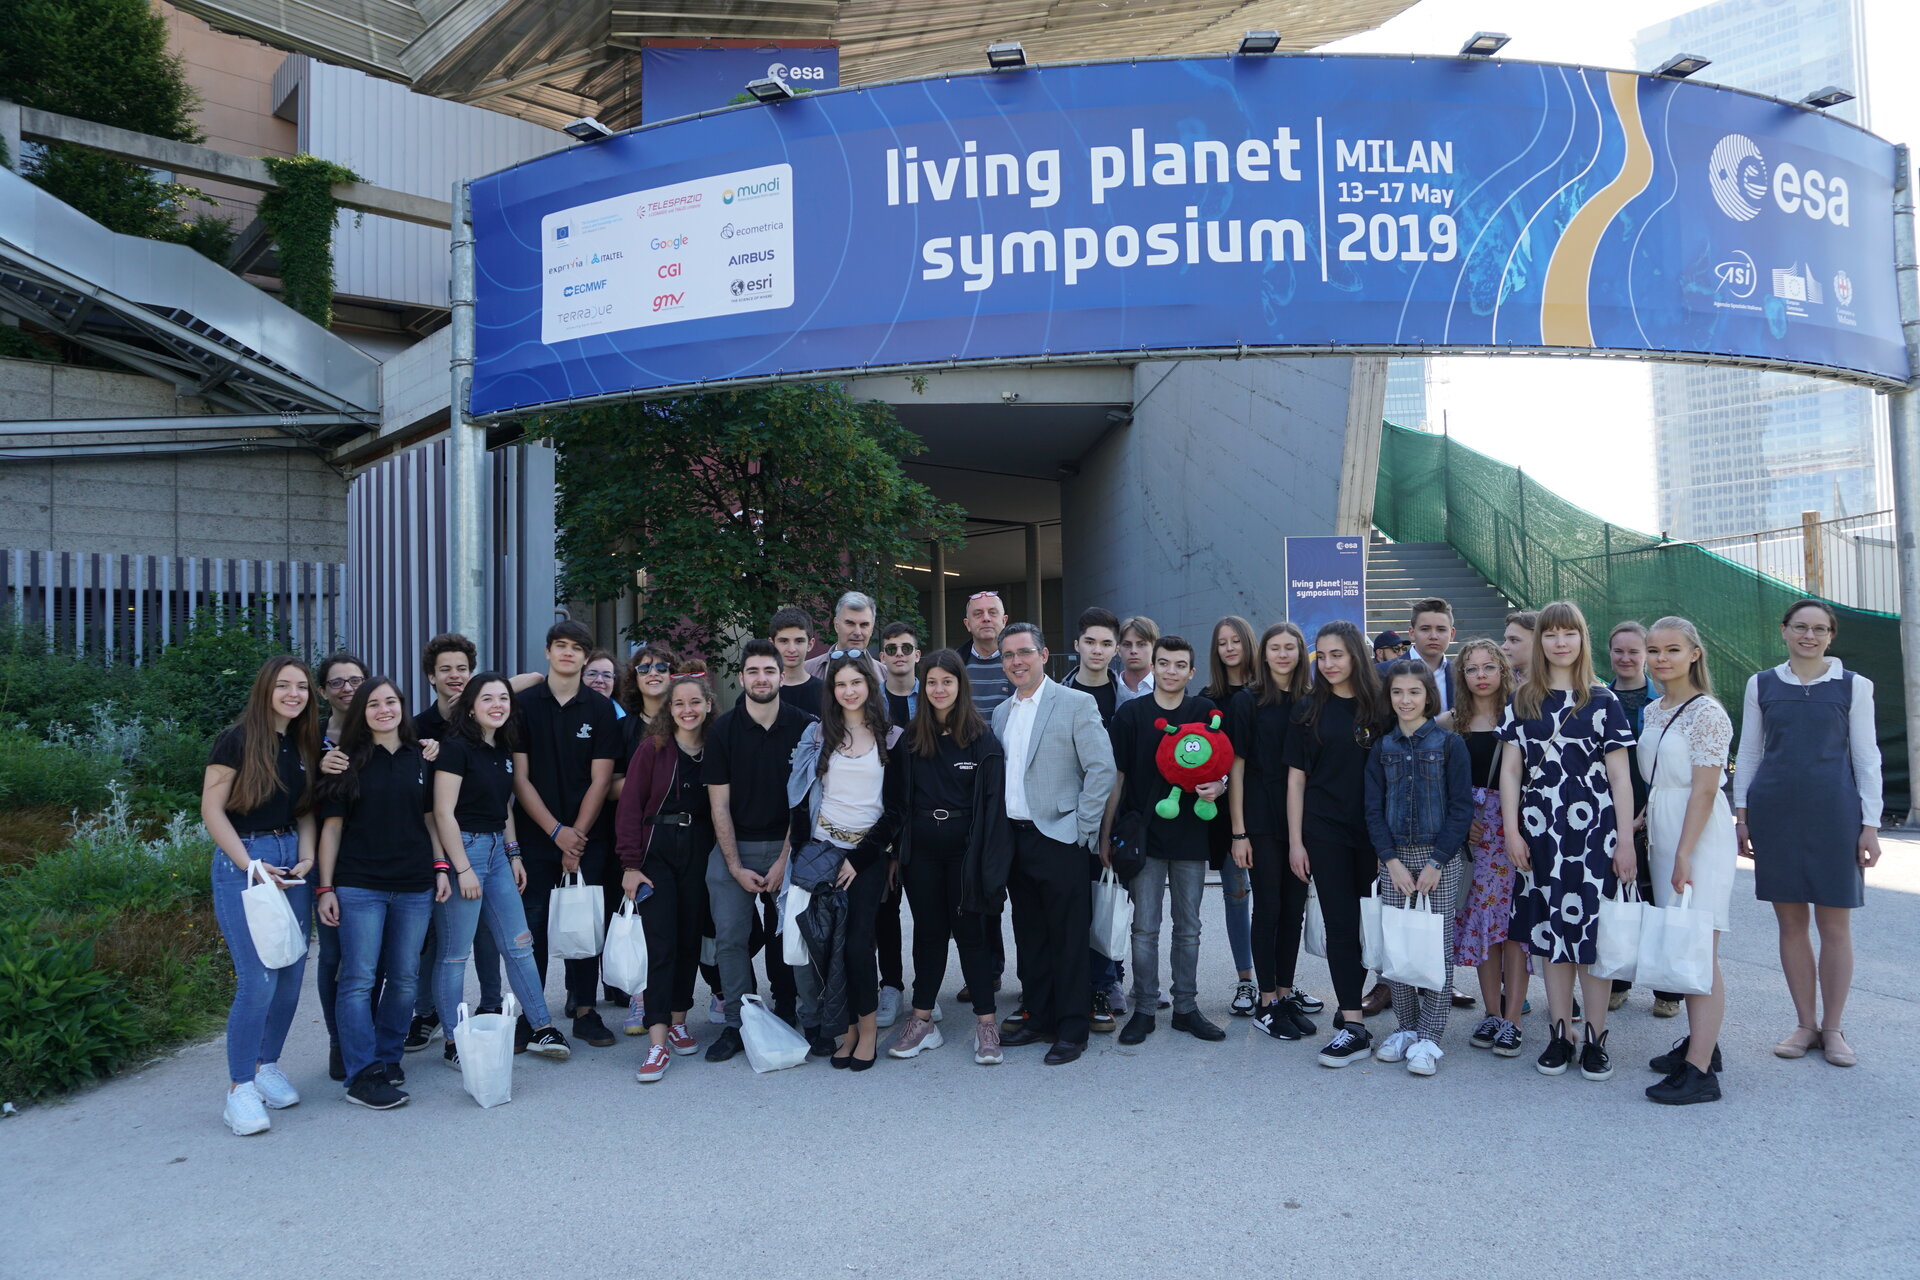 Climate Detectives teams at the entrance of the LPS 2019 in Milan, Italy